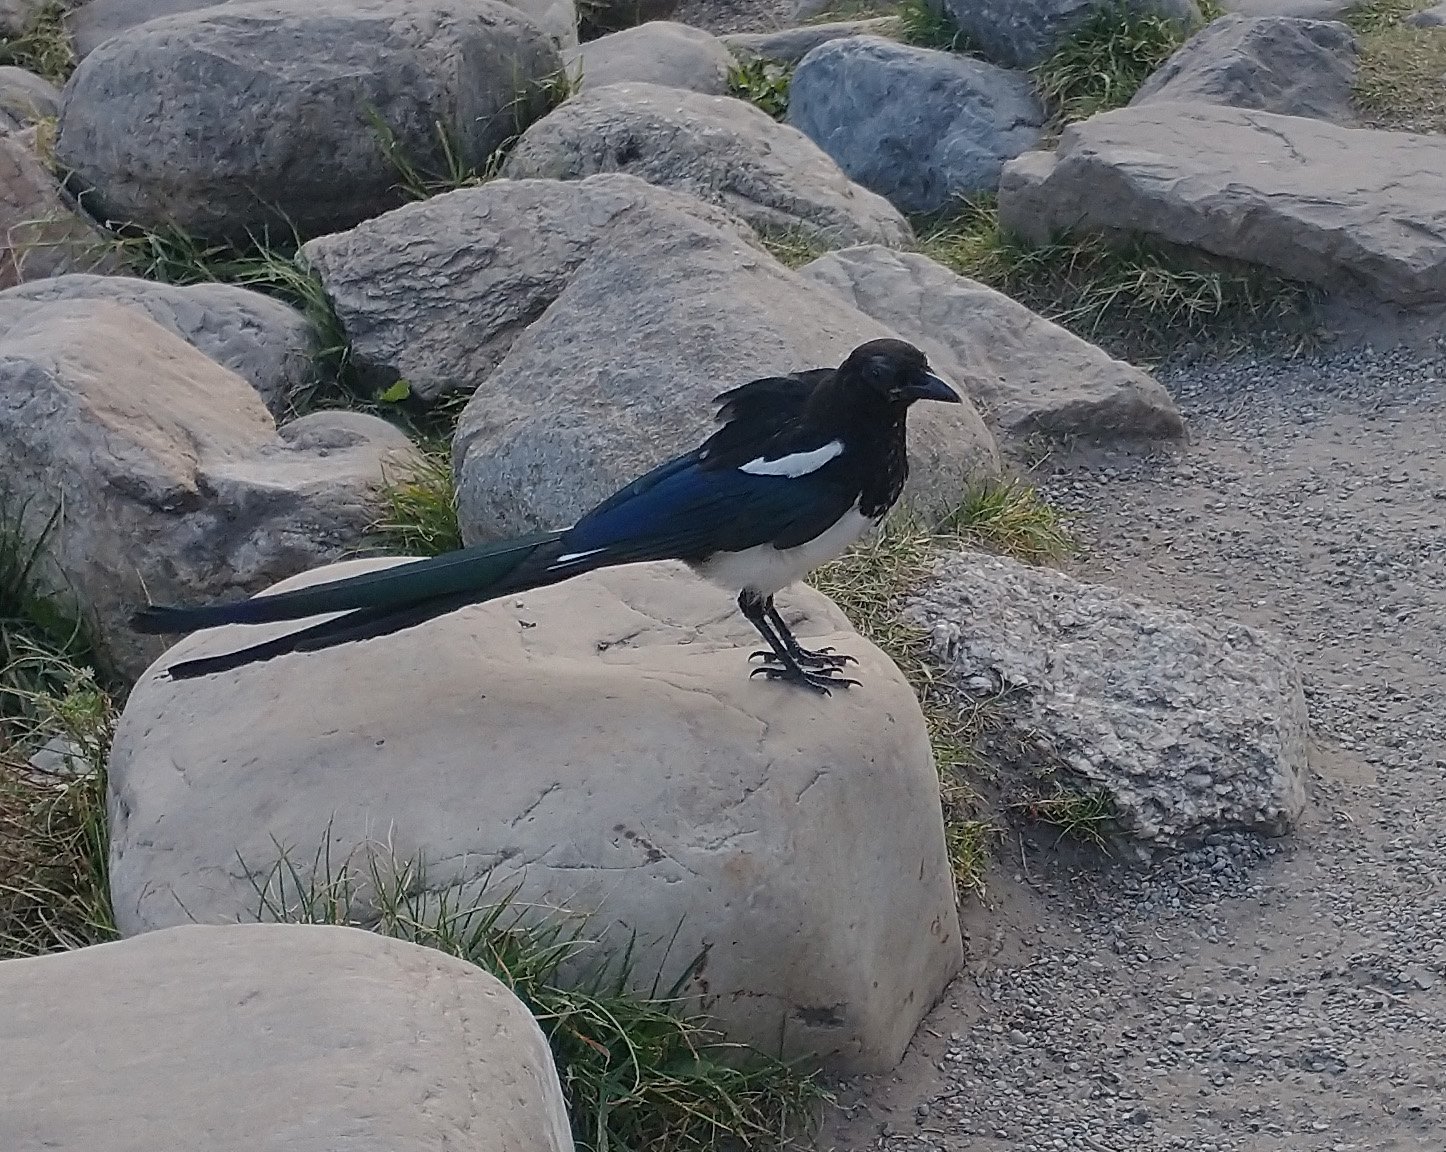 Magpie coming up to tourists to beg for food. This is what happens if you feed animals guys, they'll come up to you and entertain you. Phew what a nightmare.